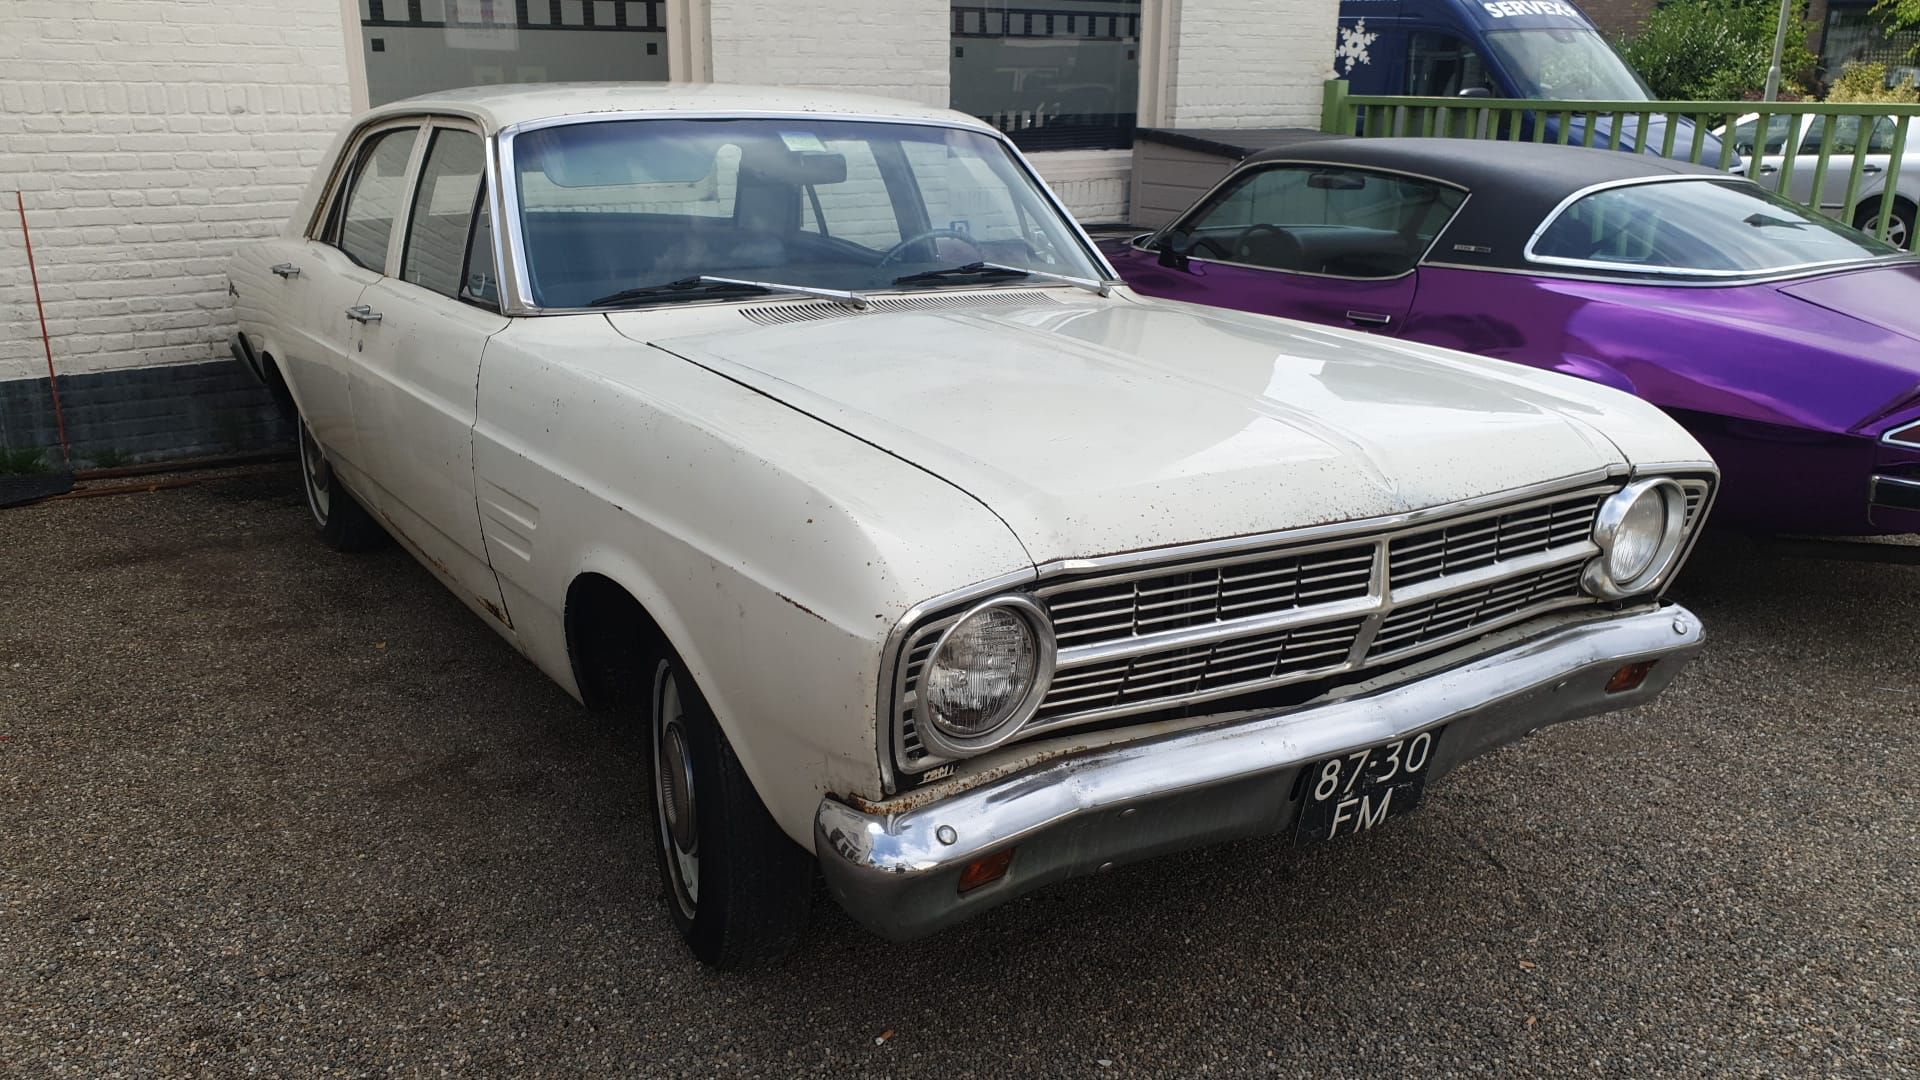 1967 Ford Falcon This item has reduced buyer's premium of 14,5% including VAT. A&hellip;